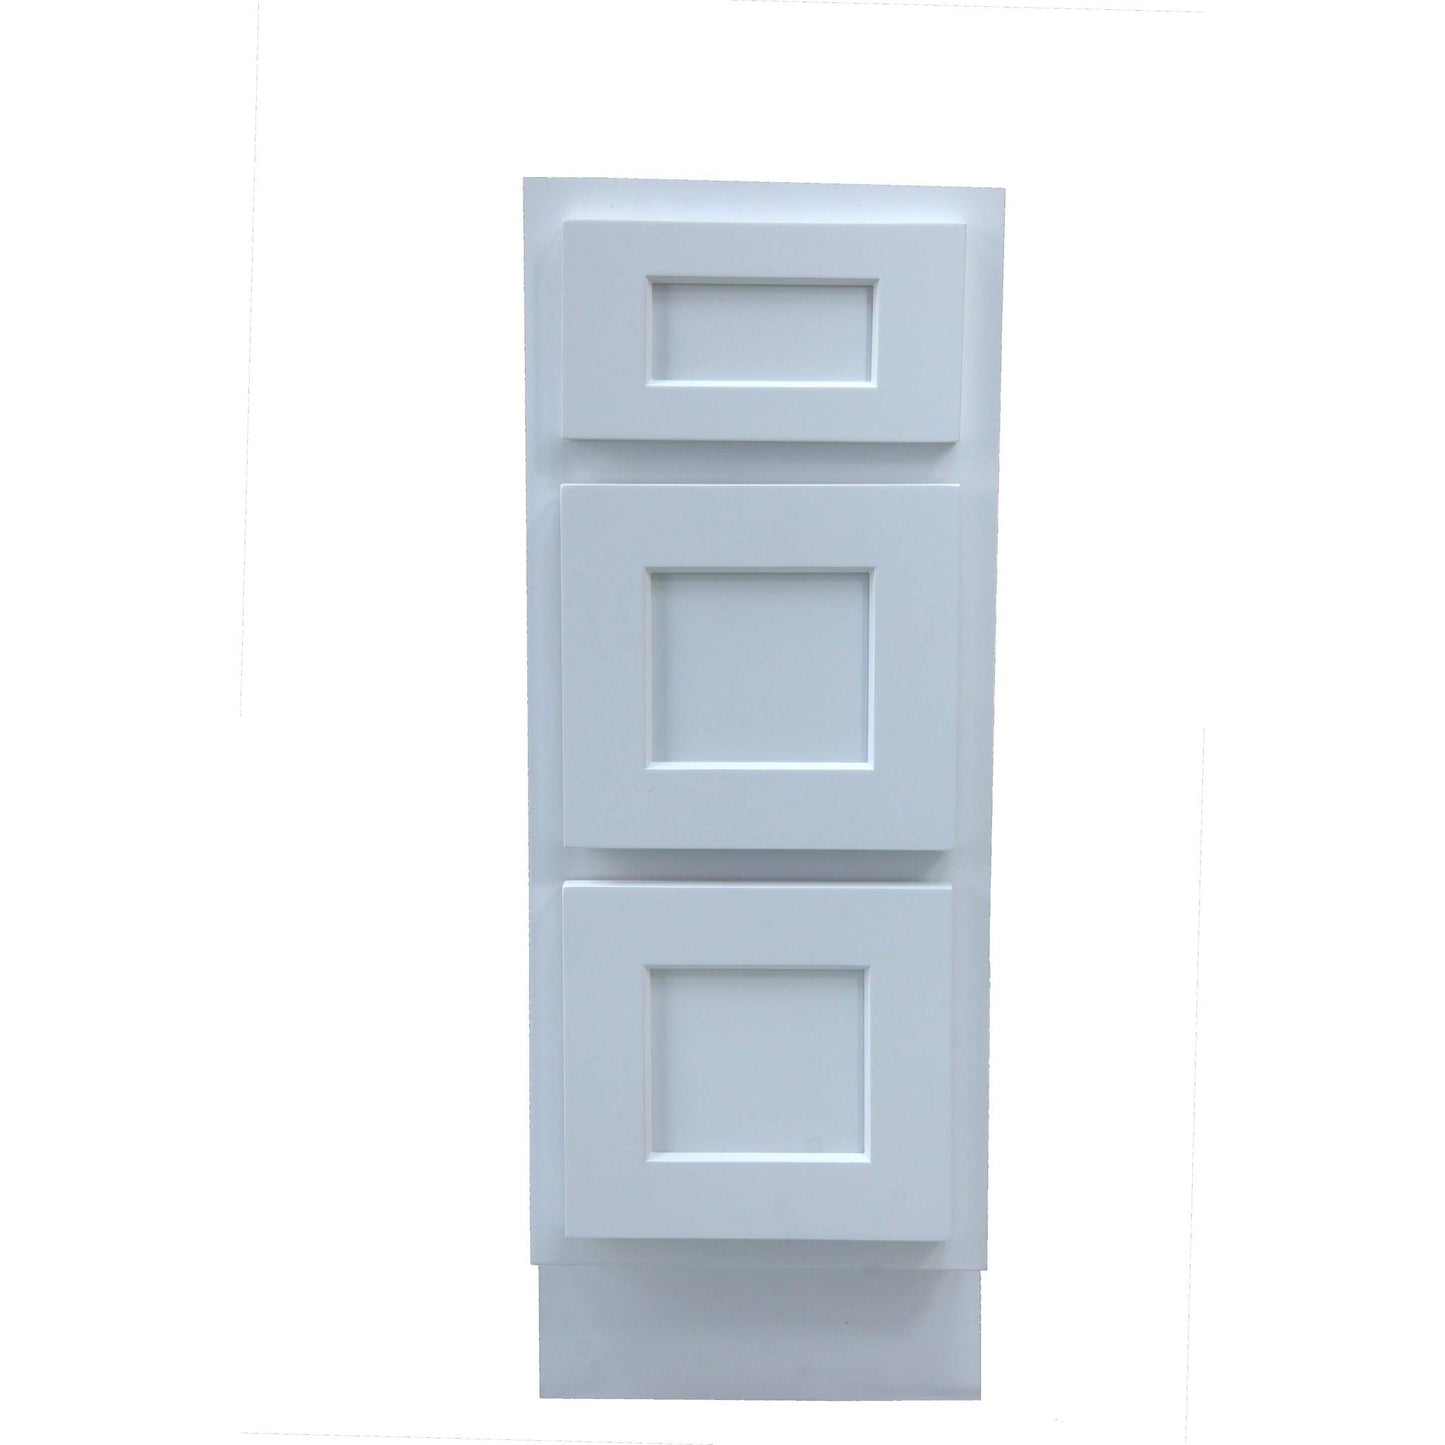 Vanity Art 12" White Single Freestanding Solid Wood Vanity Cabinet With 3 Soft Closing Drawers